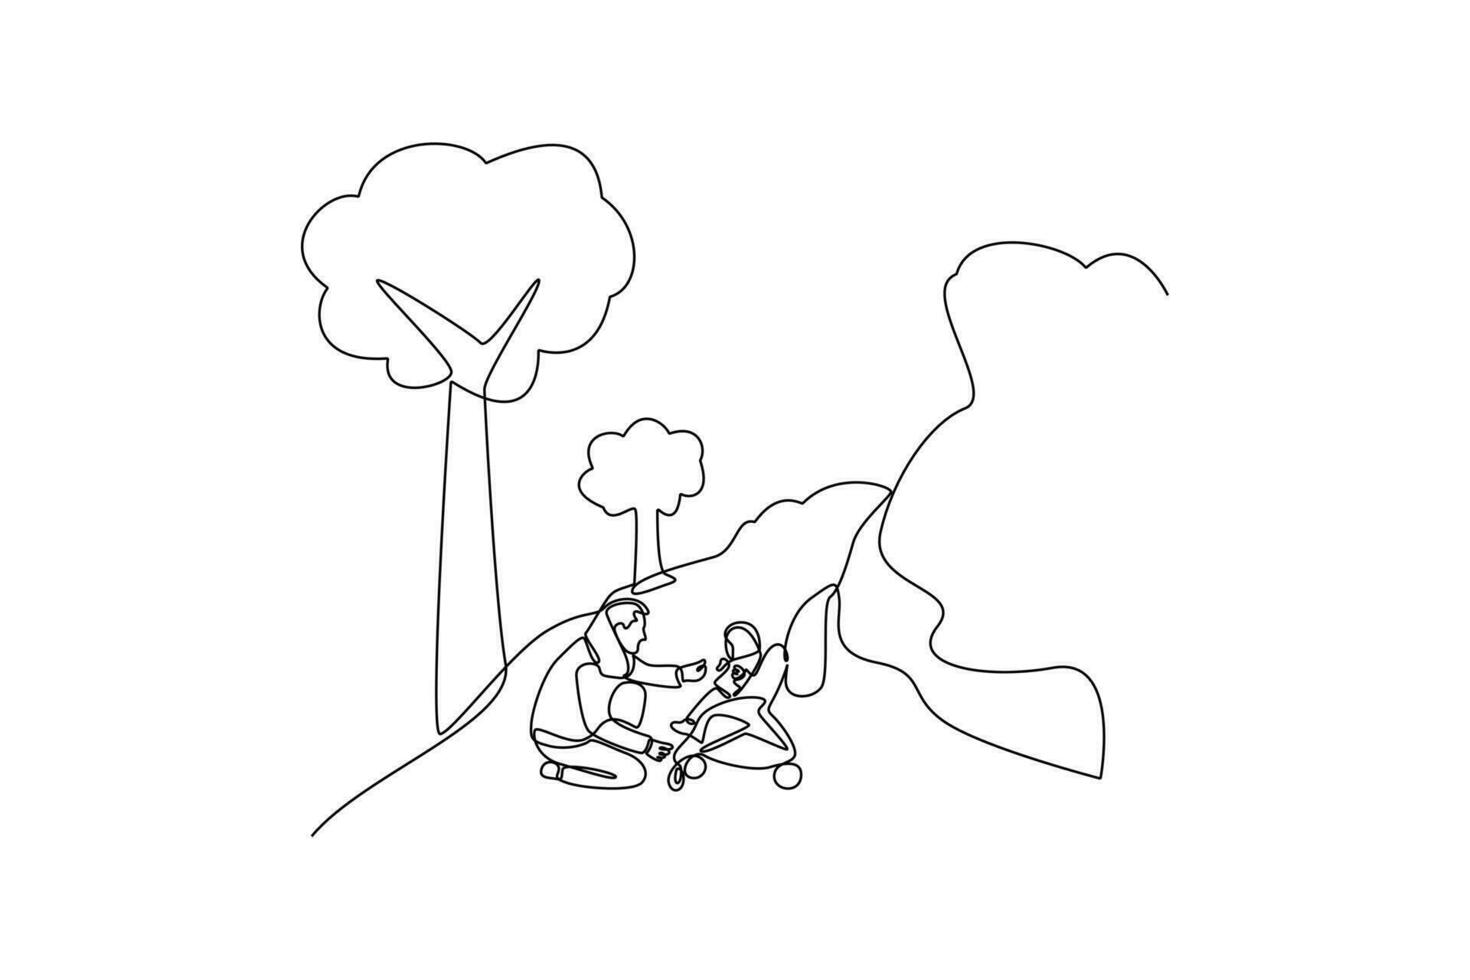 Continuous one line drawing  Family and children spending time together. Walking family concept. Doodle vector illustration.